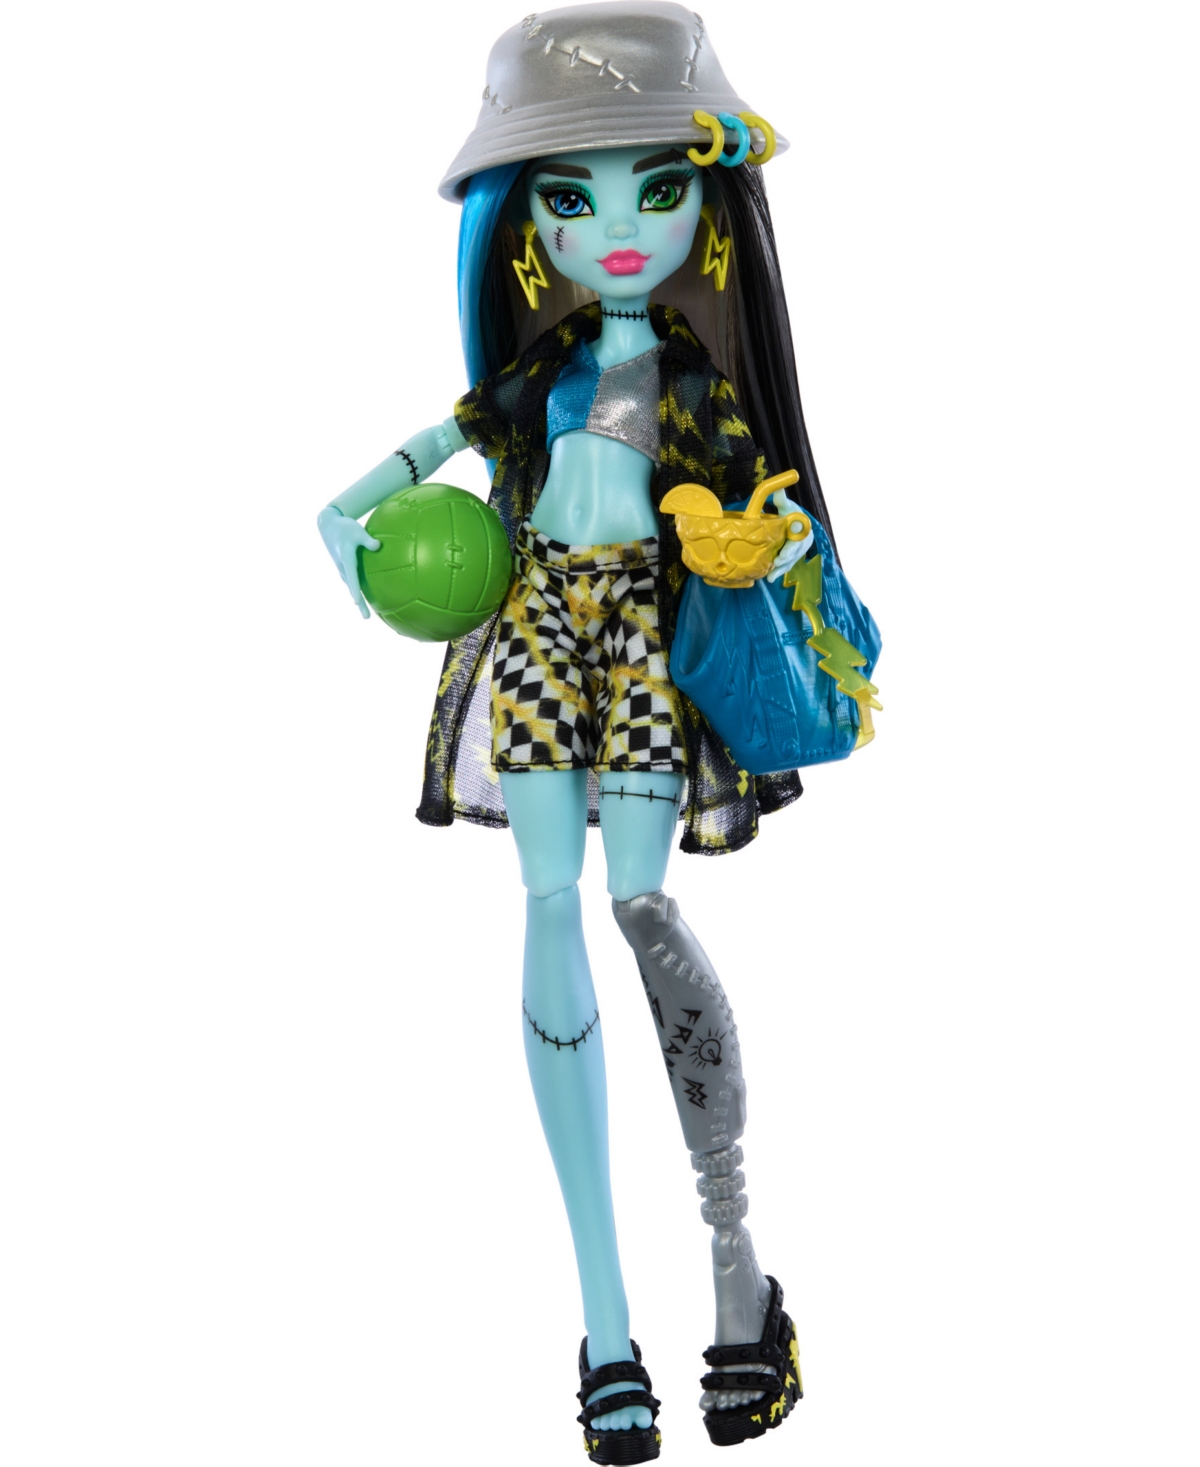 Shop Monster High Scare-adise Island Frankie Stein Fashion Doll With Swimsuit Accessories In No Color